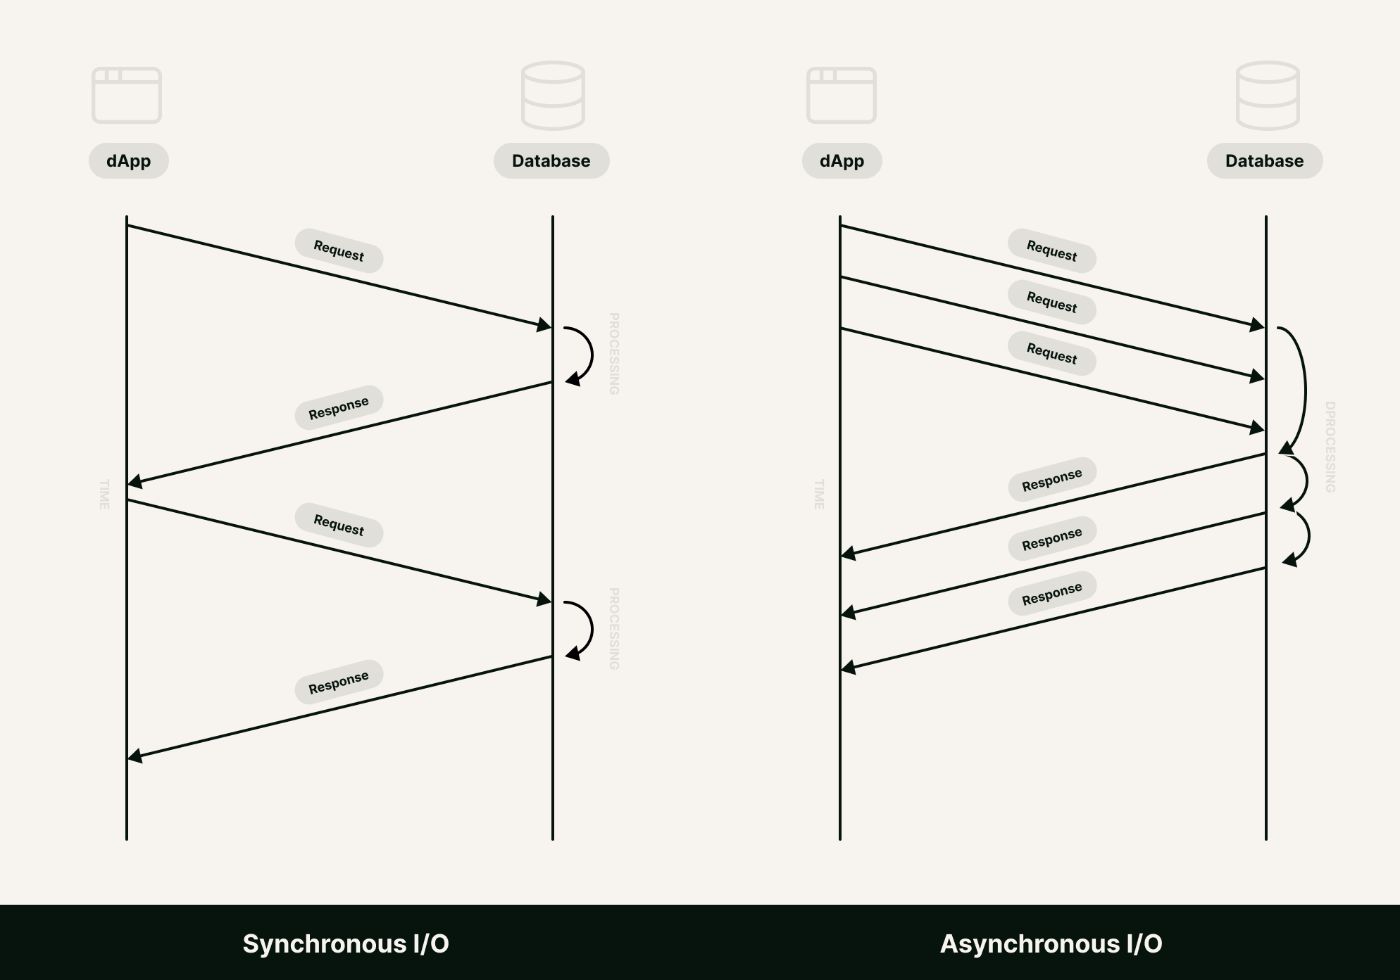 Synchronous (left) vs asynchronous (right) request processing.